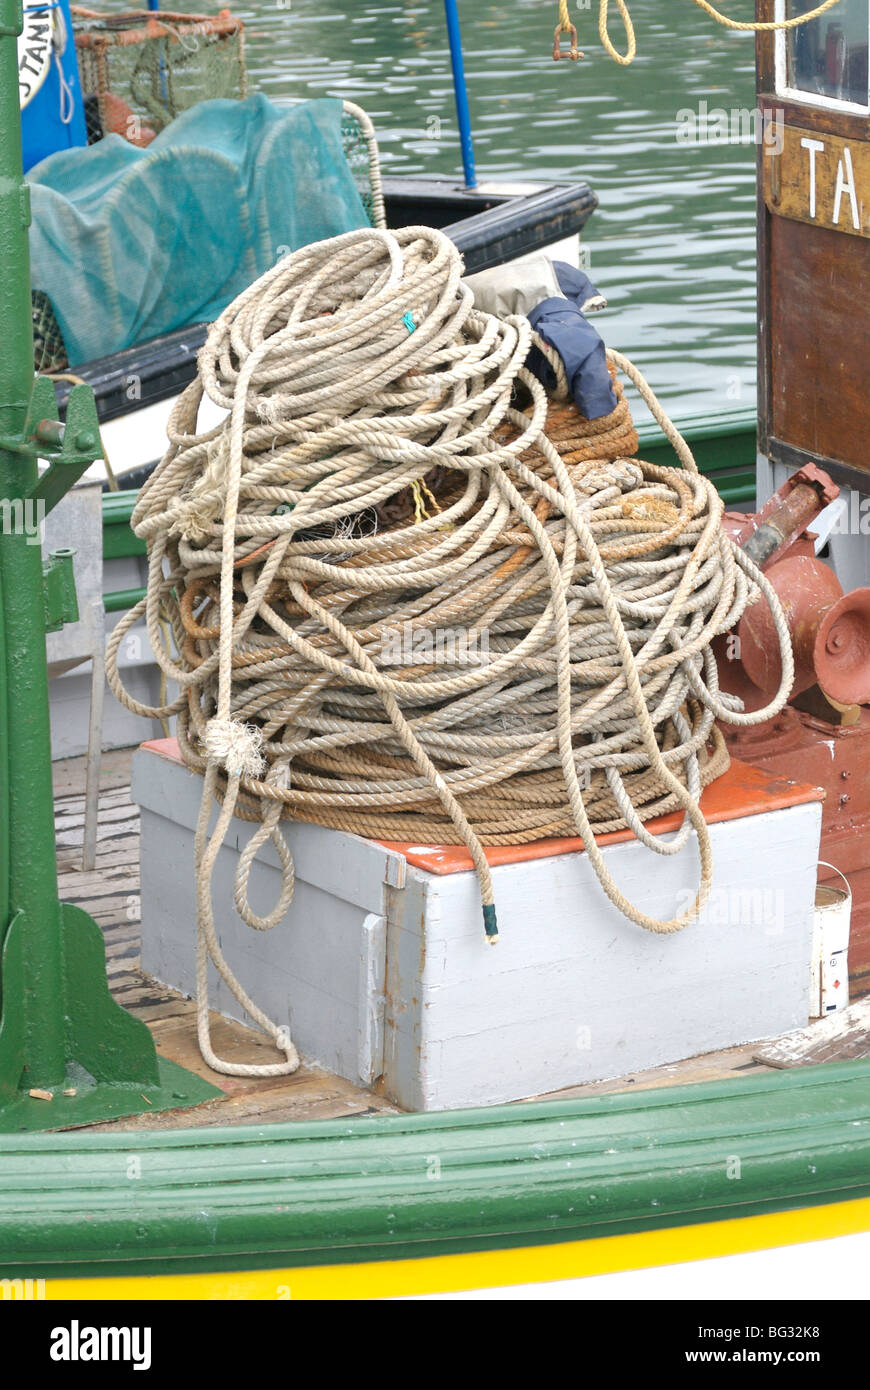 A coil of rope on a fishing boat at Kalk Bay Harbour, Cape Town, South Africa; Stock Photo